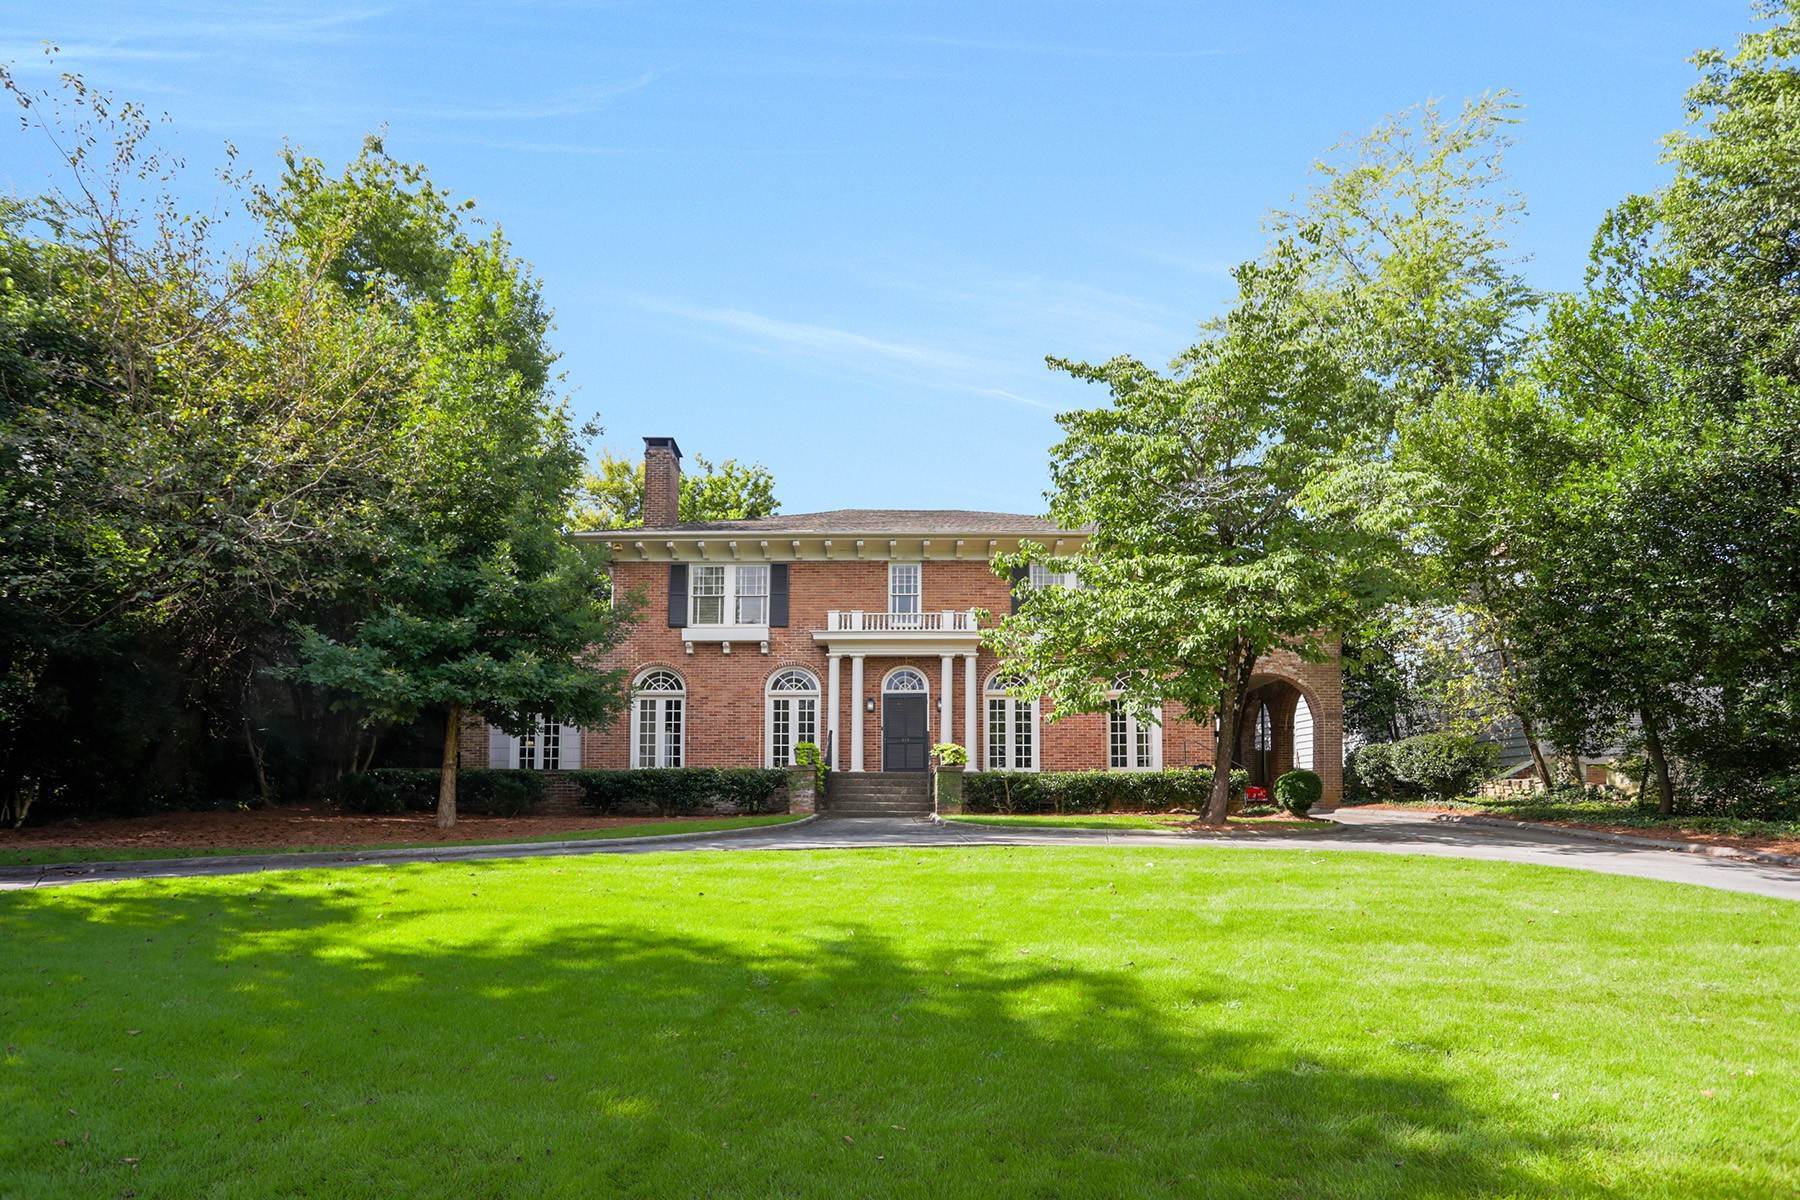 Single Family Homes for Sale at One Of The Most Architecturally Stunning Homes In Ansley Park 271 15th Street NE Atlanta, Georgia 30309 United States